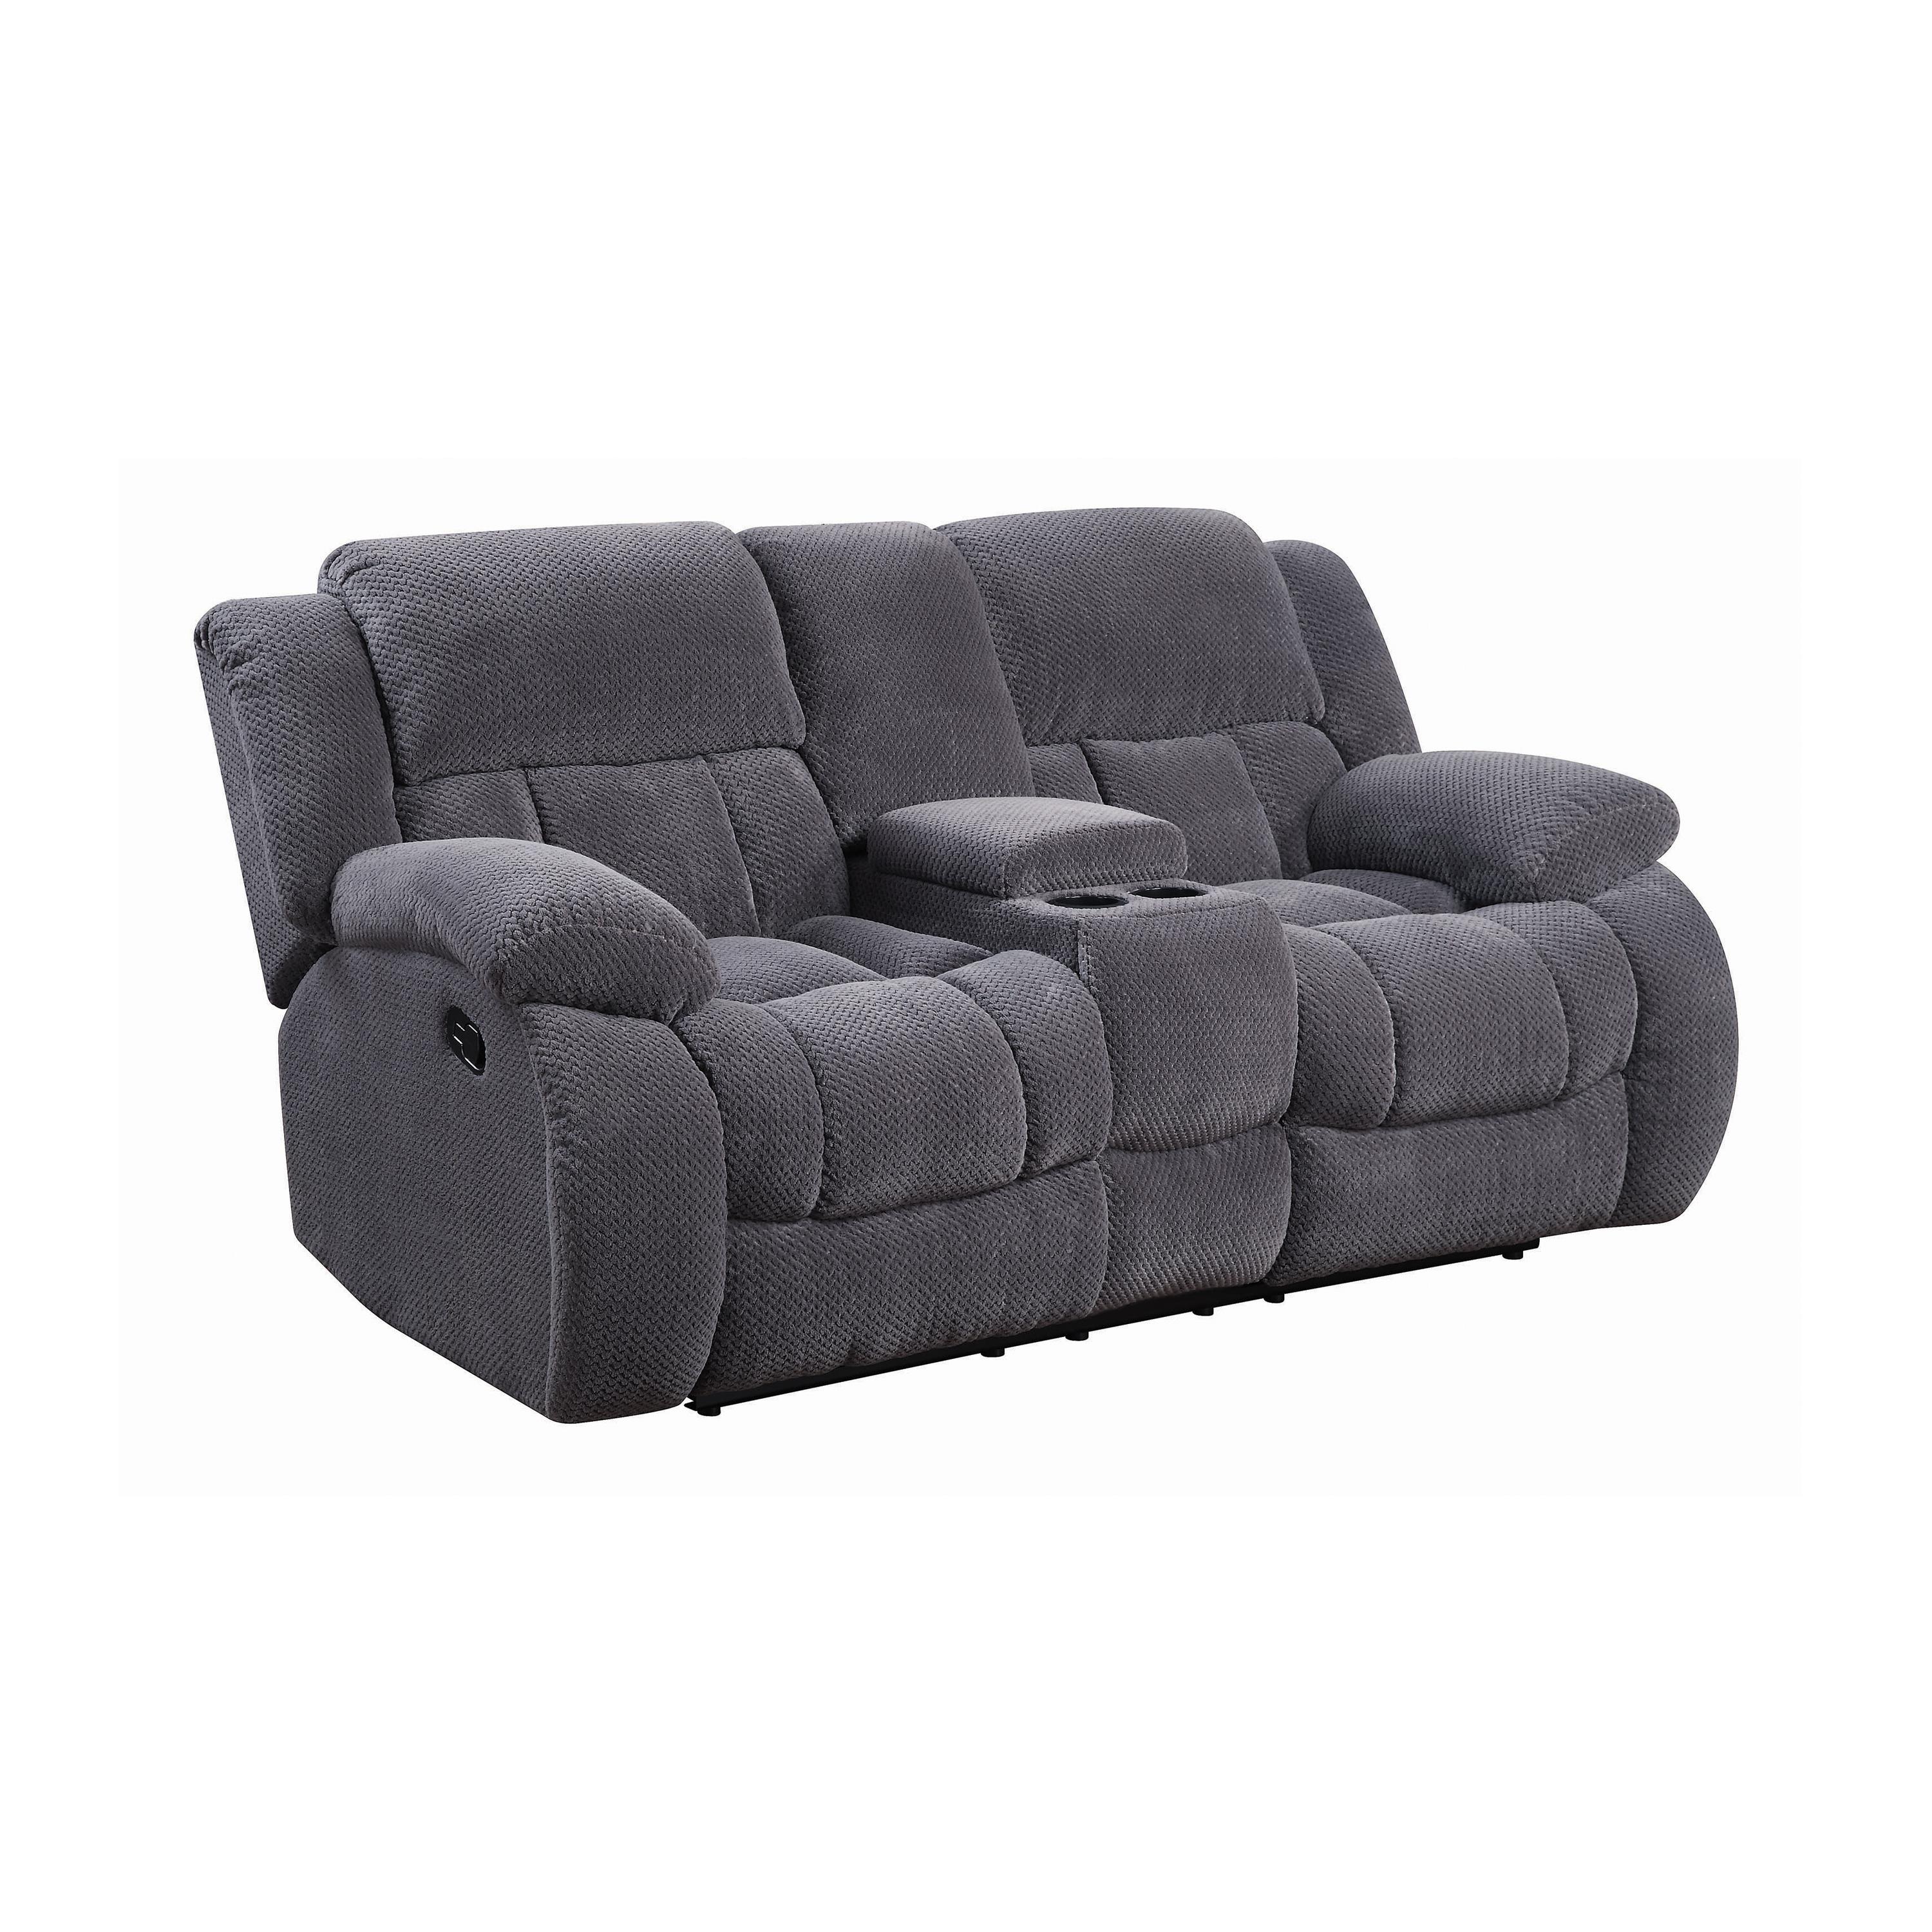 Contemporary Motion Loveseat 601922 Weissman 601922 in Charcoal 